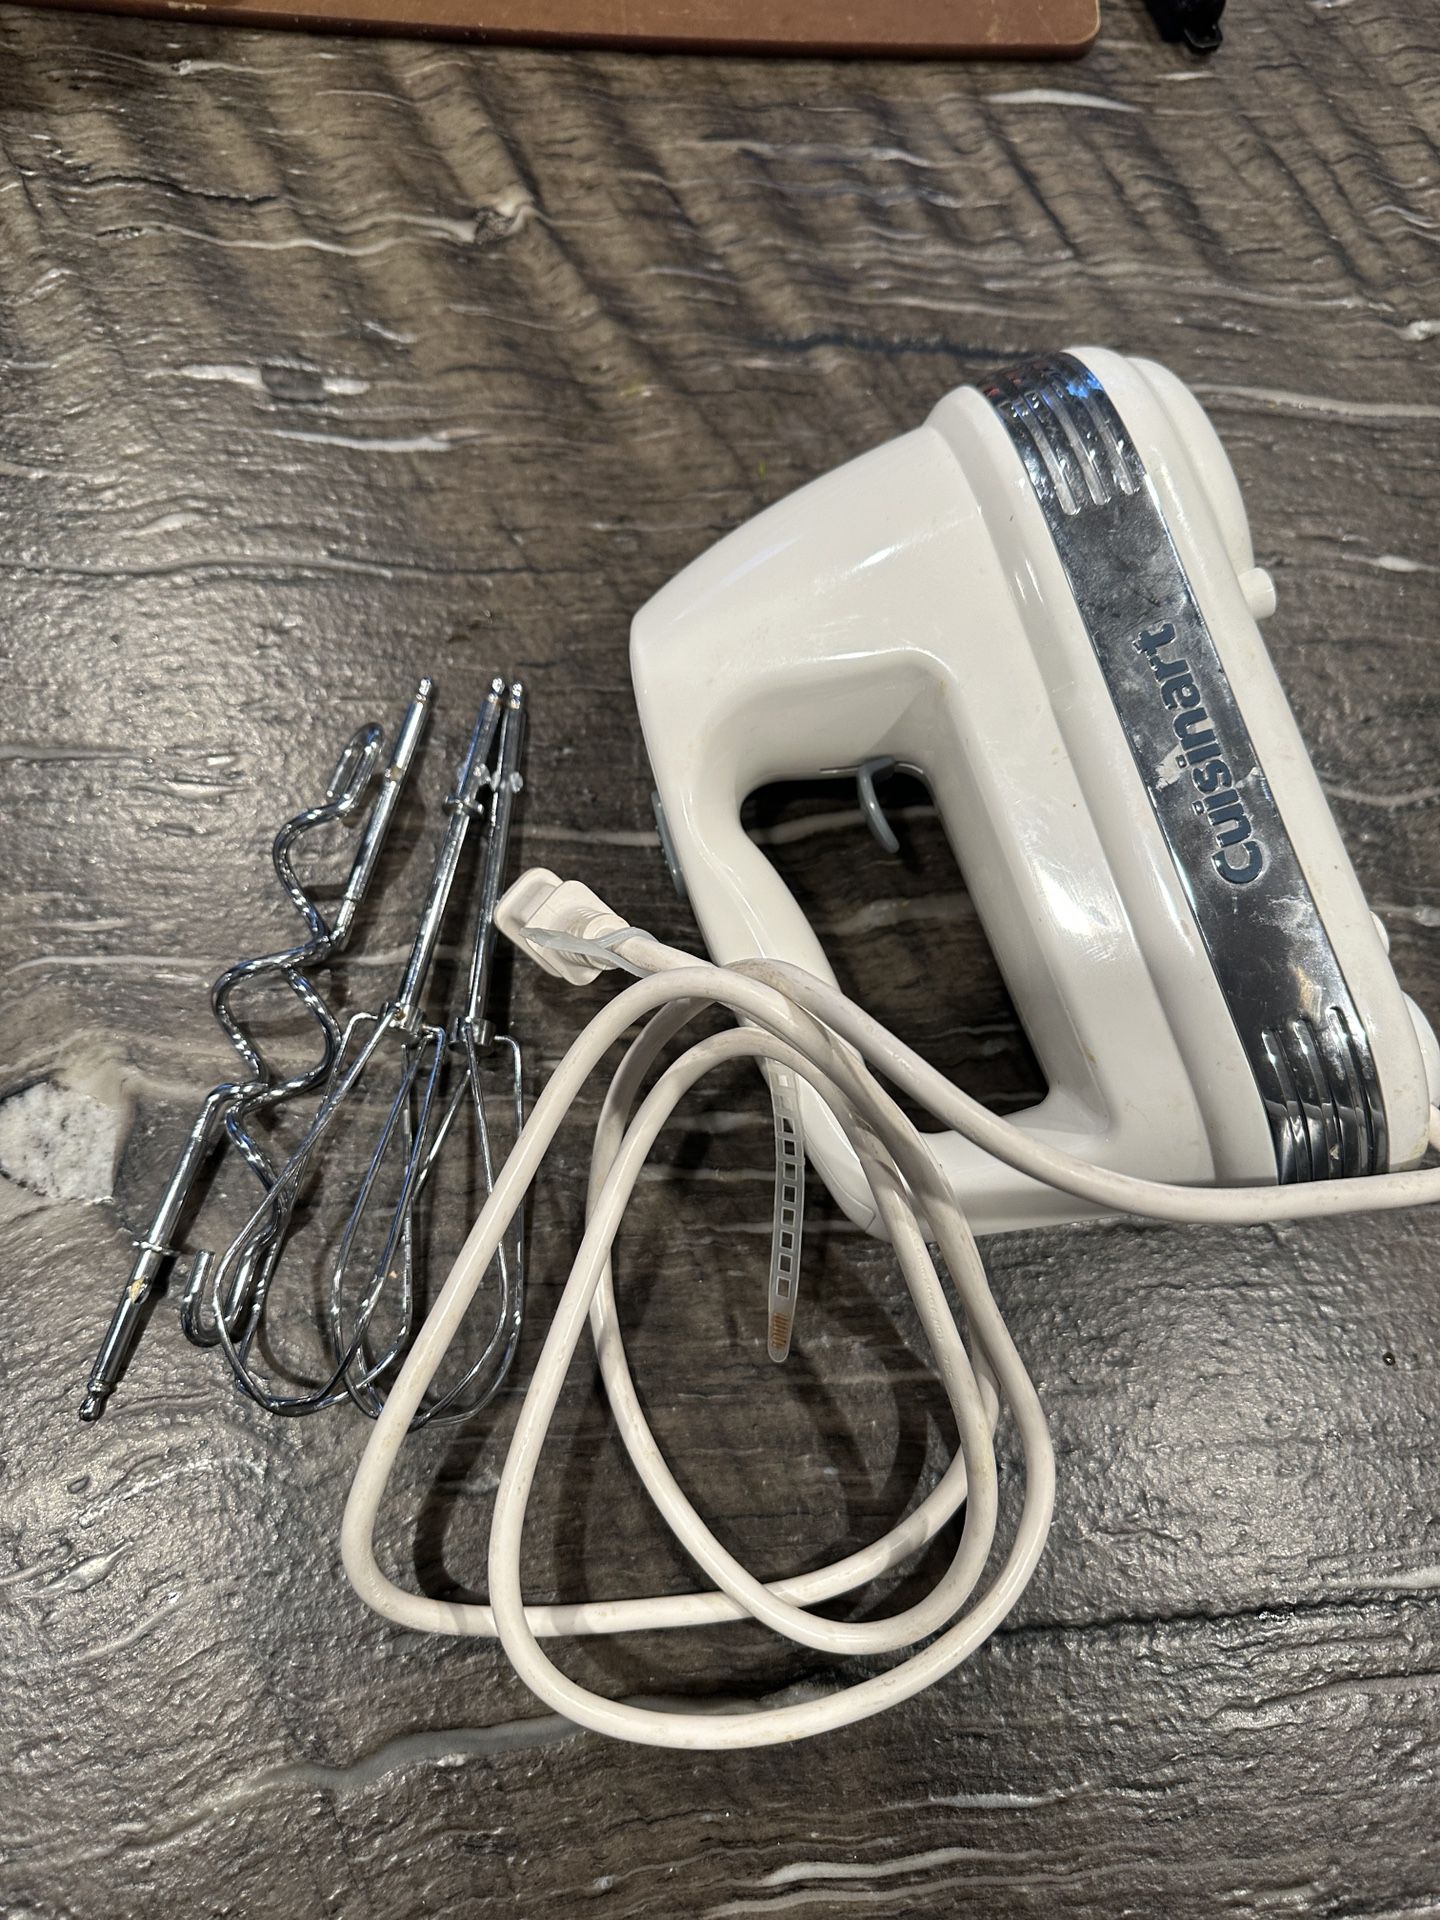 Cuisinart 5 Speed Hand Mixer Almost New for Sale in Chino Hills, CA -  OfferUp